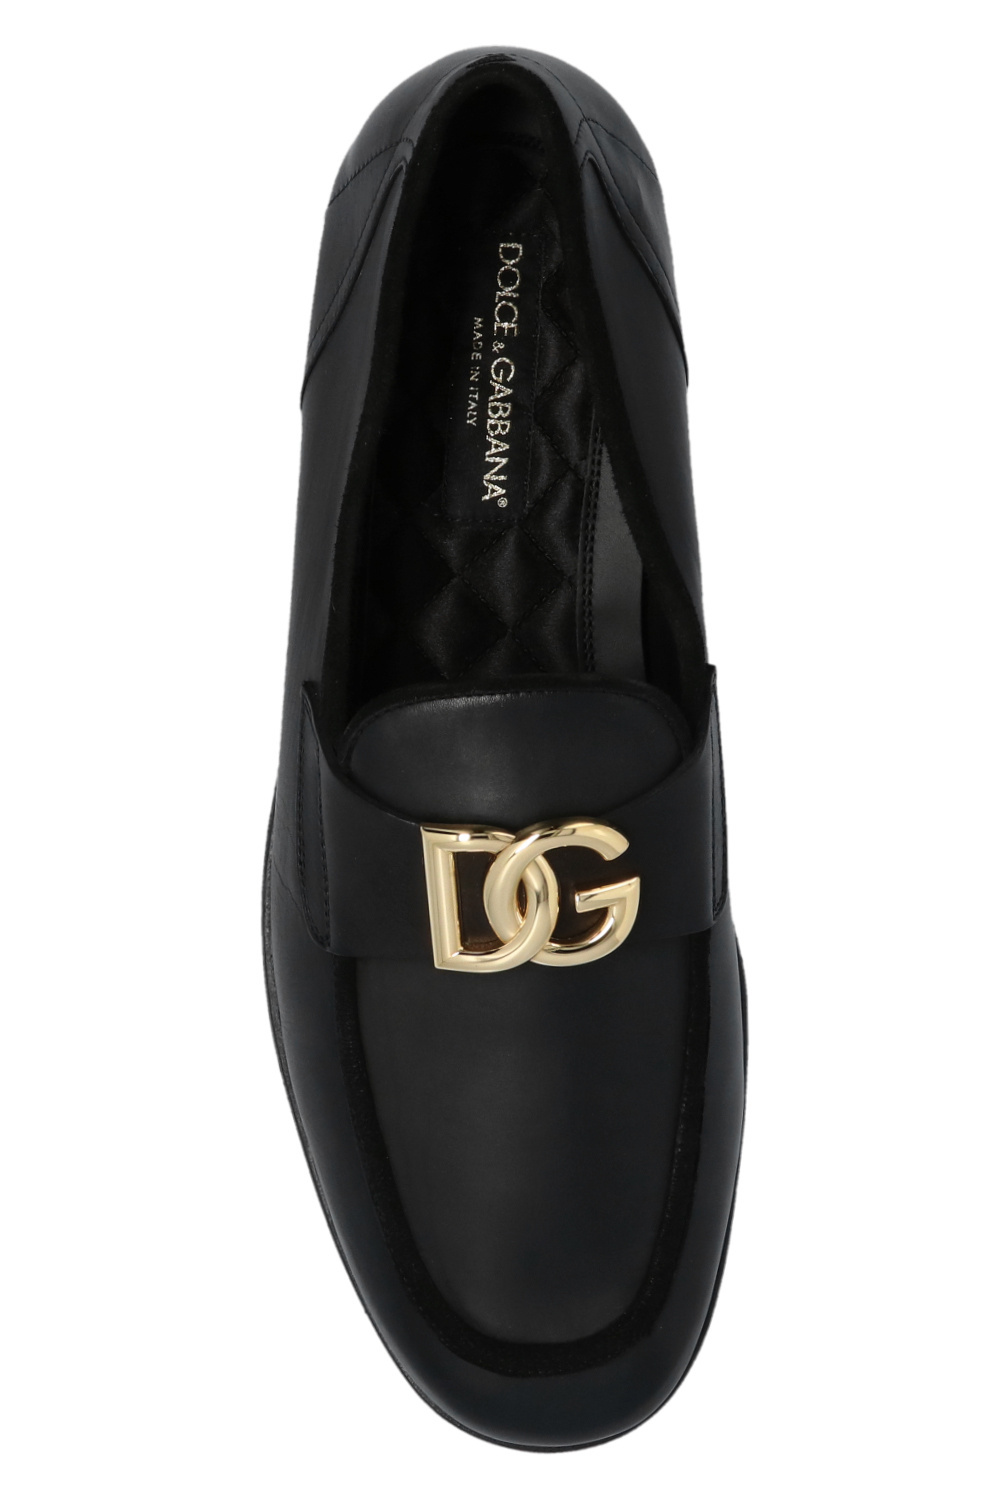 DOLCE & GABBANA KIDS LEATHER SNEAKERS Leather loafers